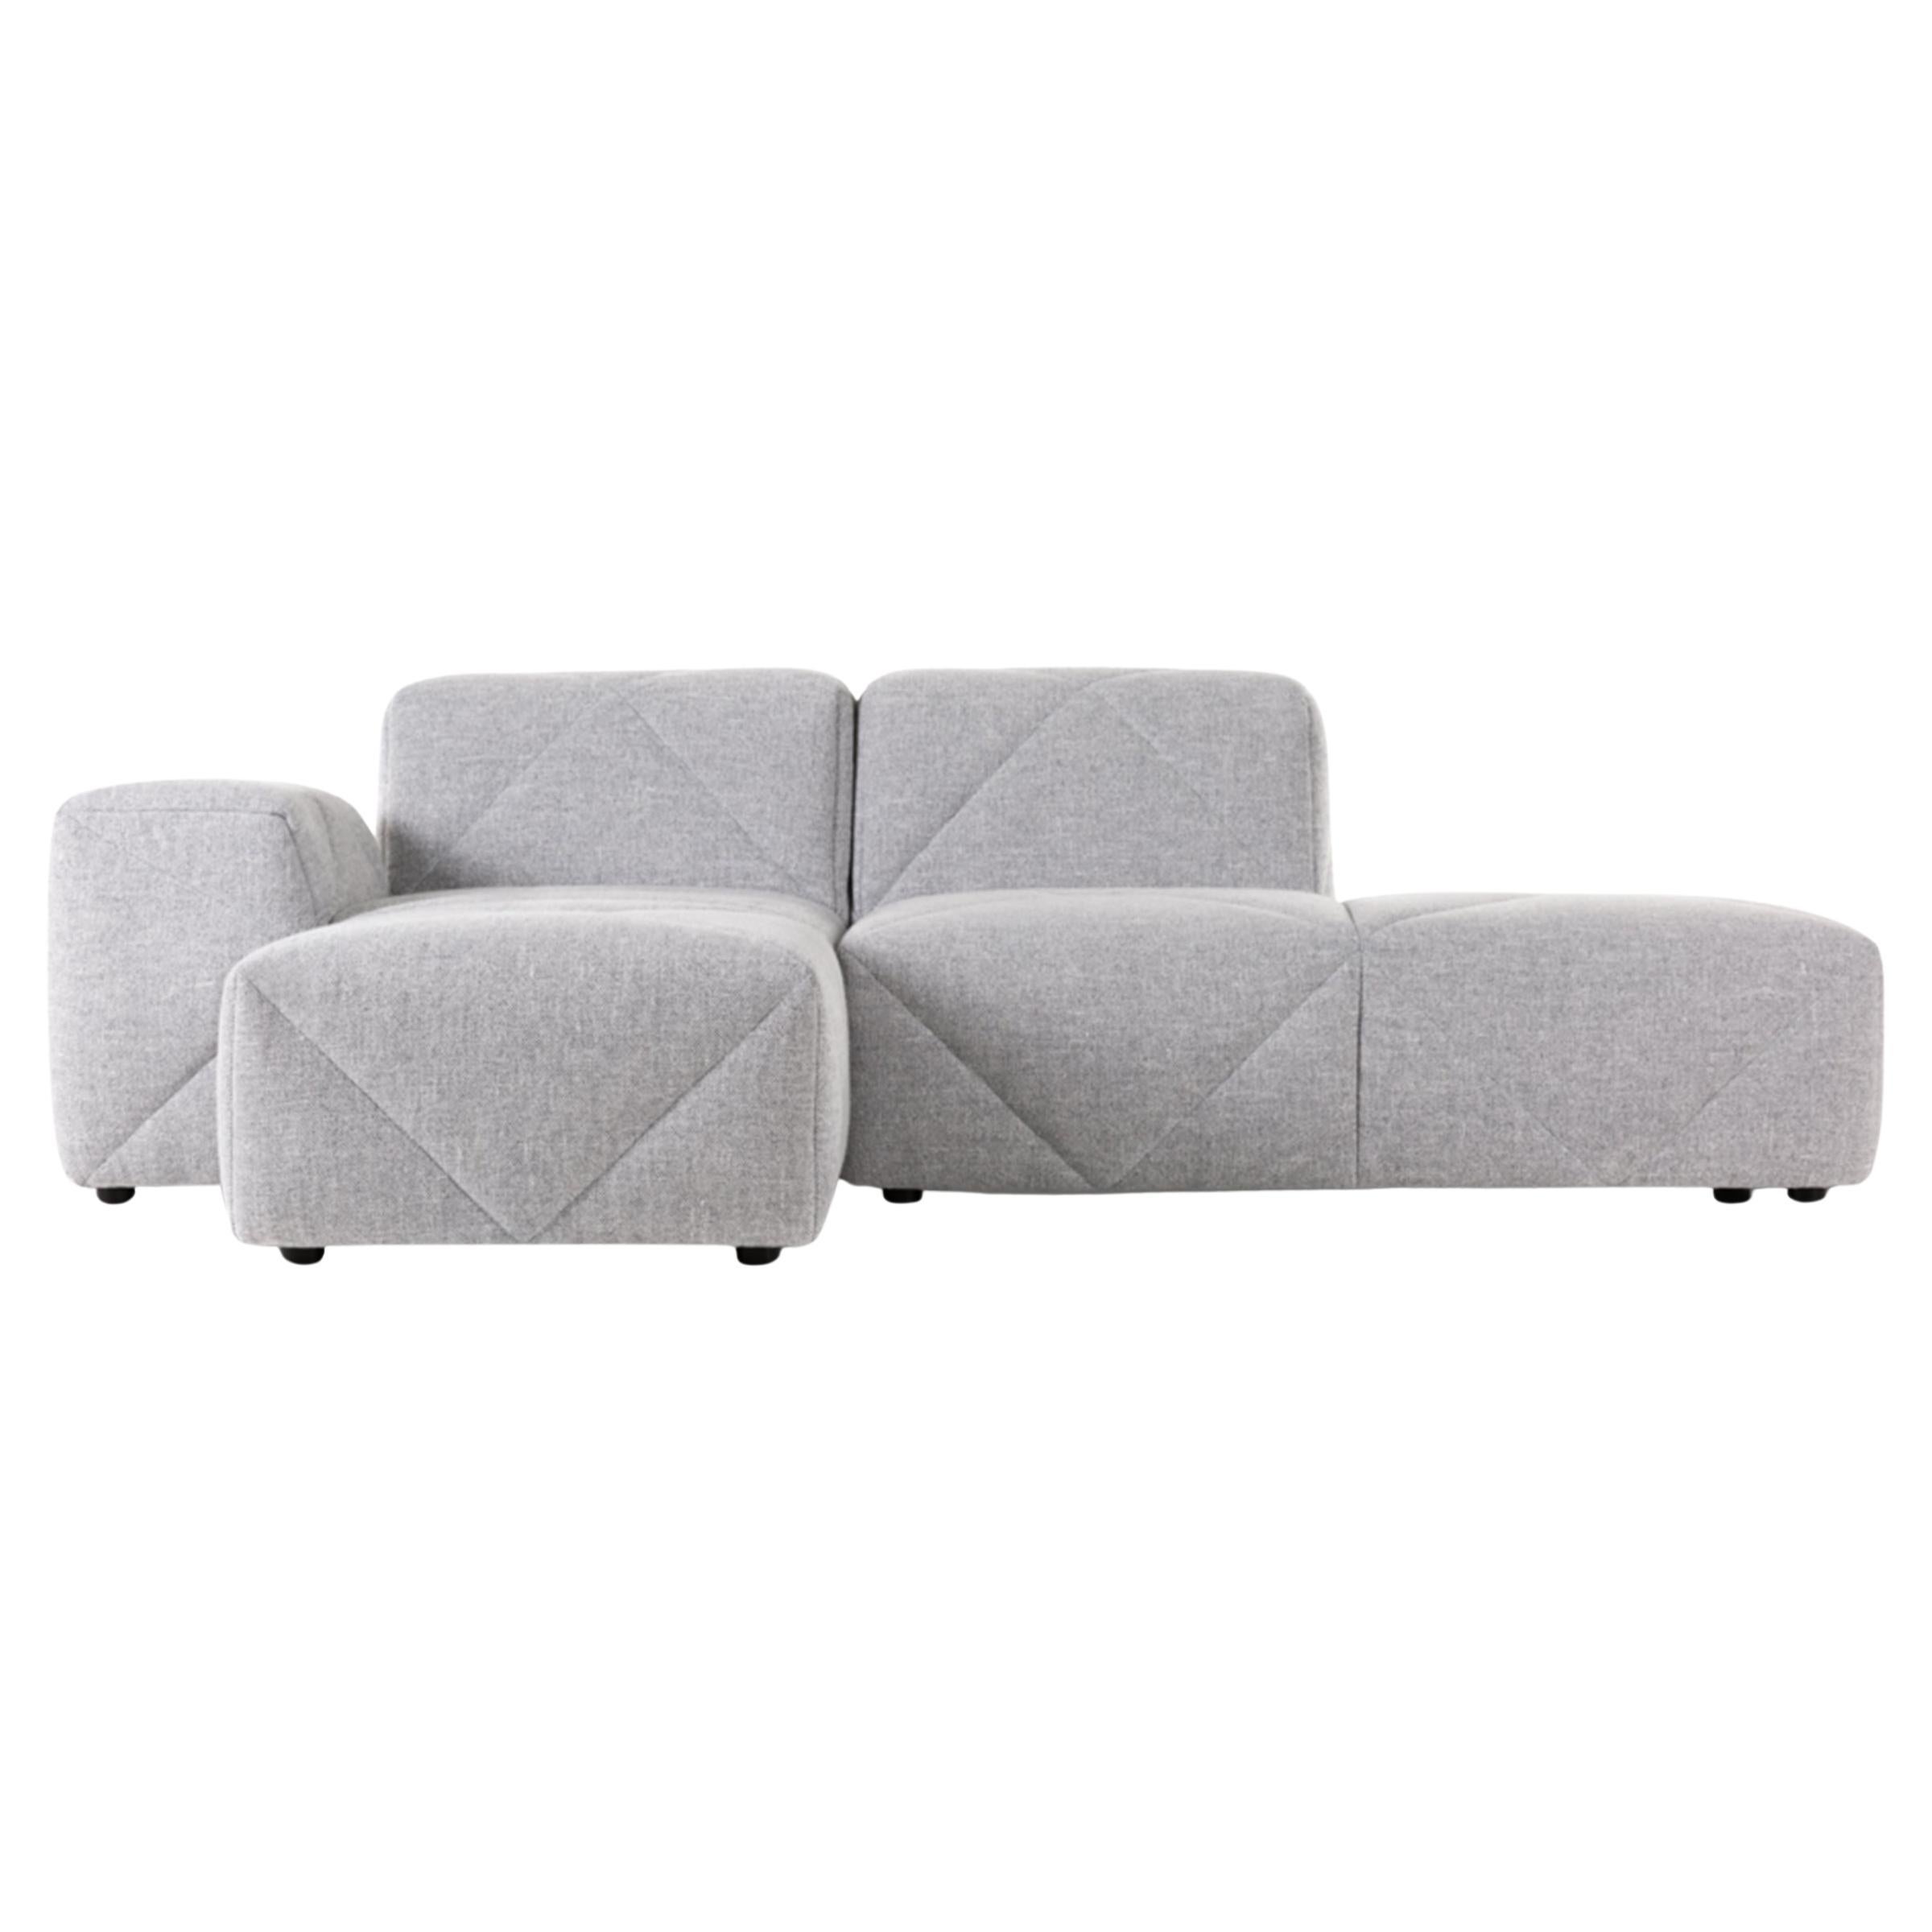 Moooi BFF Left Arm Chaise Longue Sofa in Vesper, Silver Upholstery